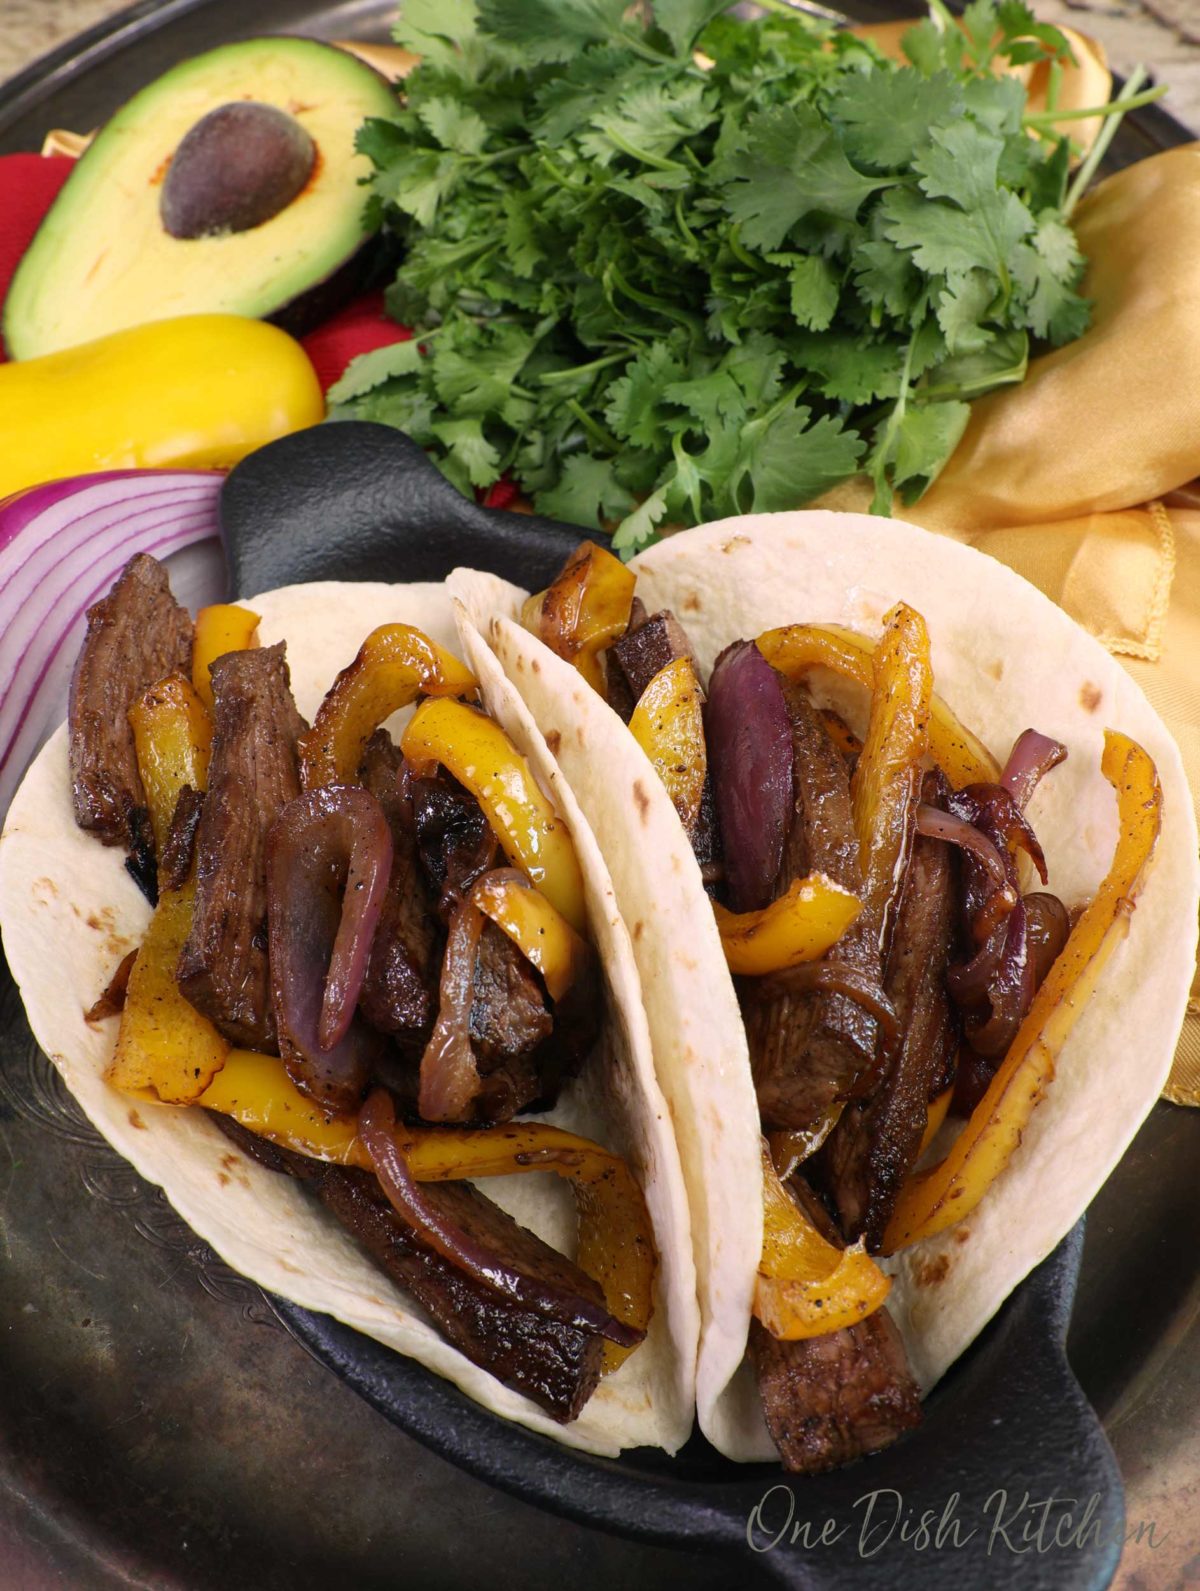 two beef steak fajitas on a black plate next to a half of an avocado and a bunch of cilantro.